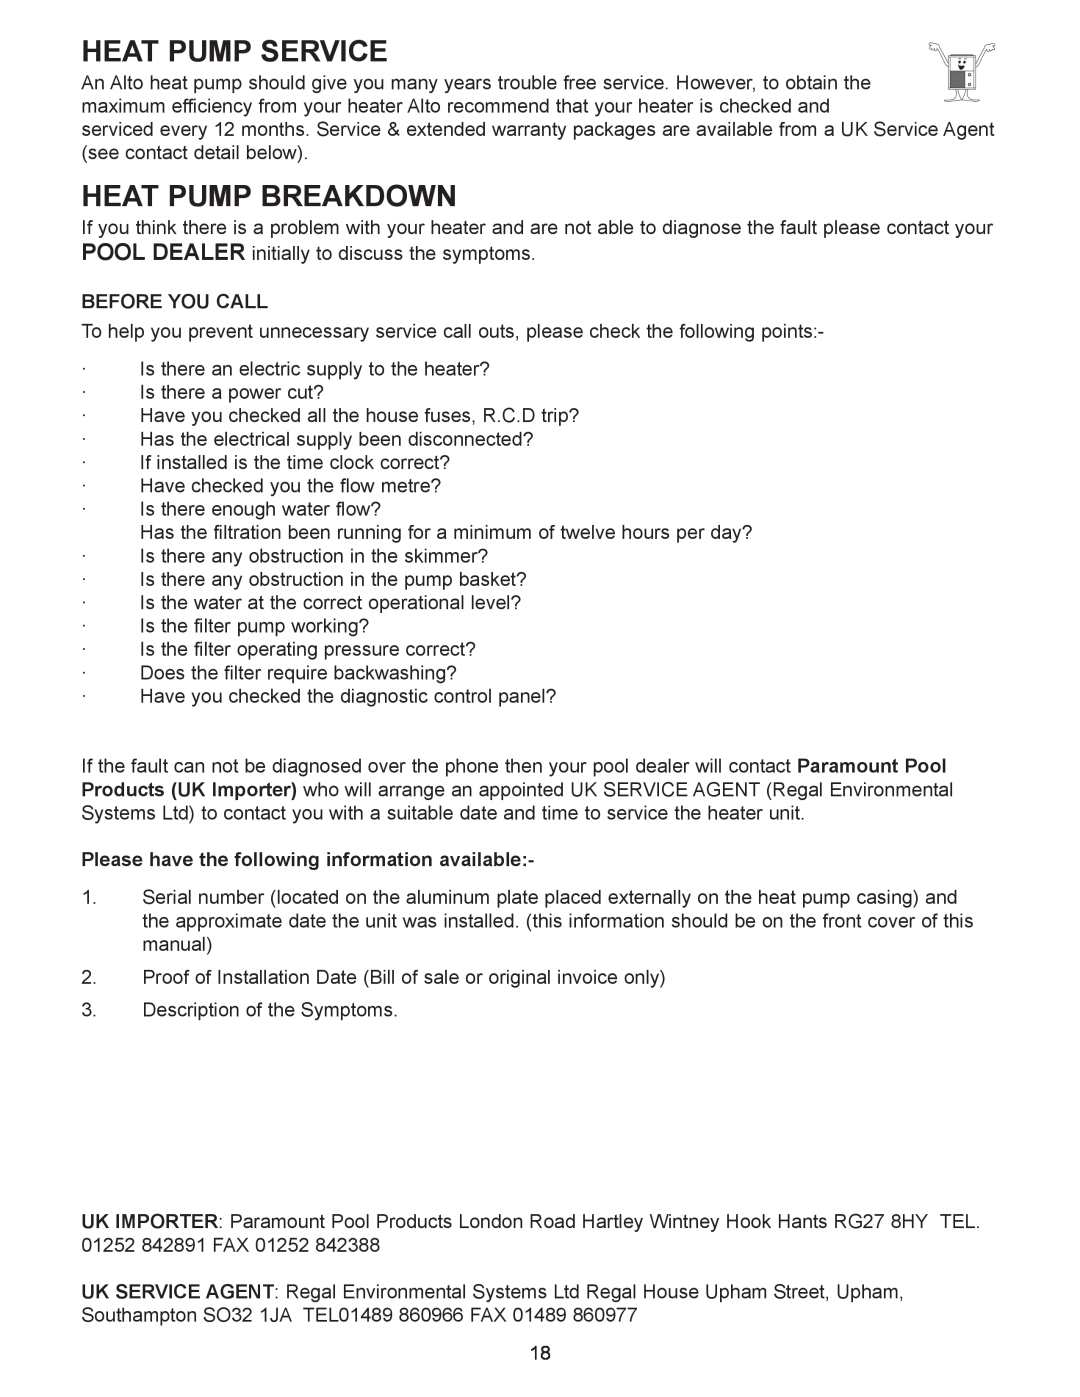 Sigma AS-H60Y Heat Pump Service, Heat Pump Breakdown, Before You Call, Please have the following information available 